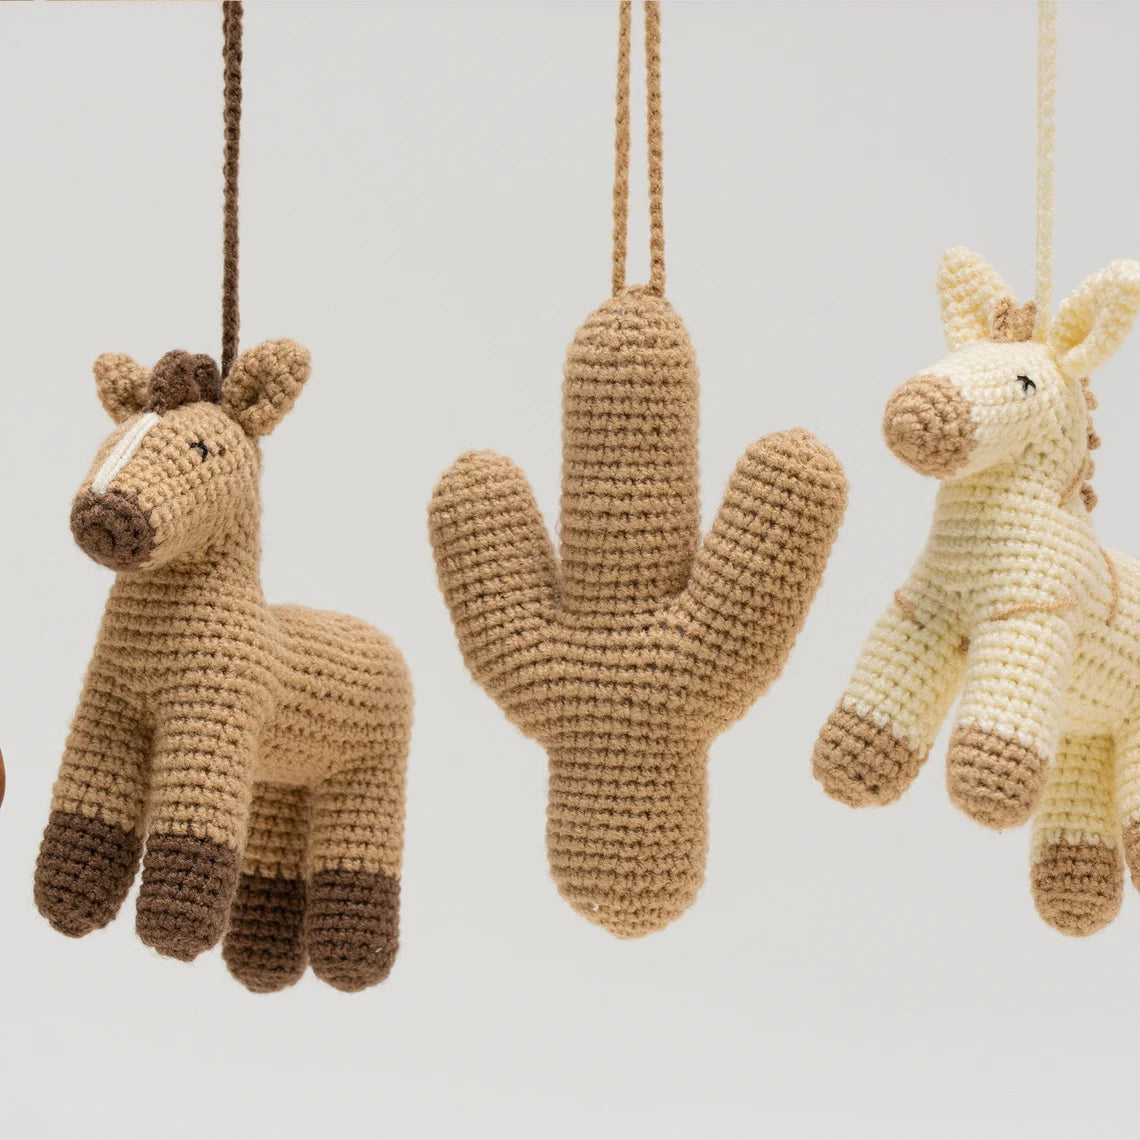 Horse Baby Play Gym, Wooden Baby Gym / Personalized Crochet Letters / HANDMADE